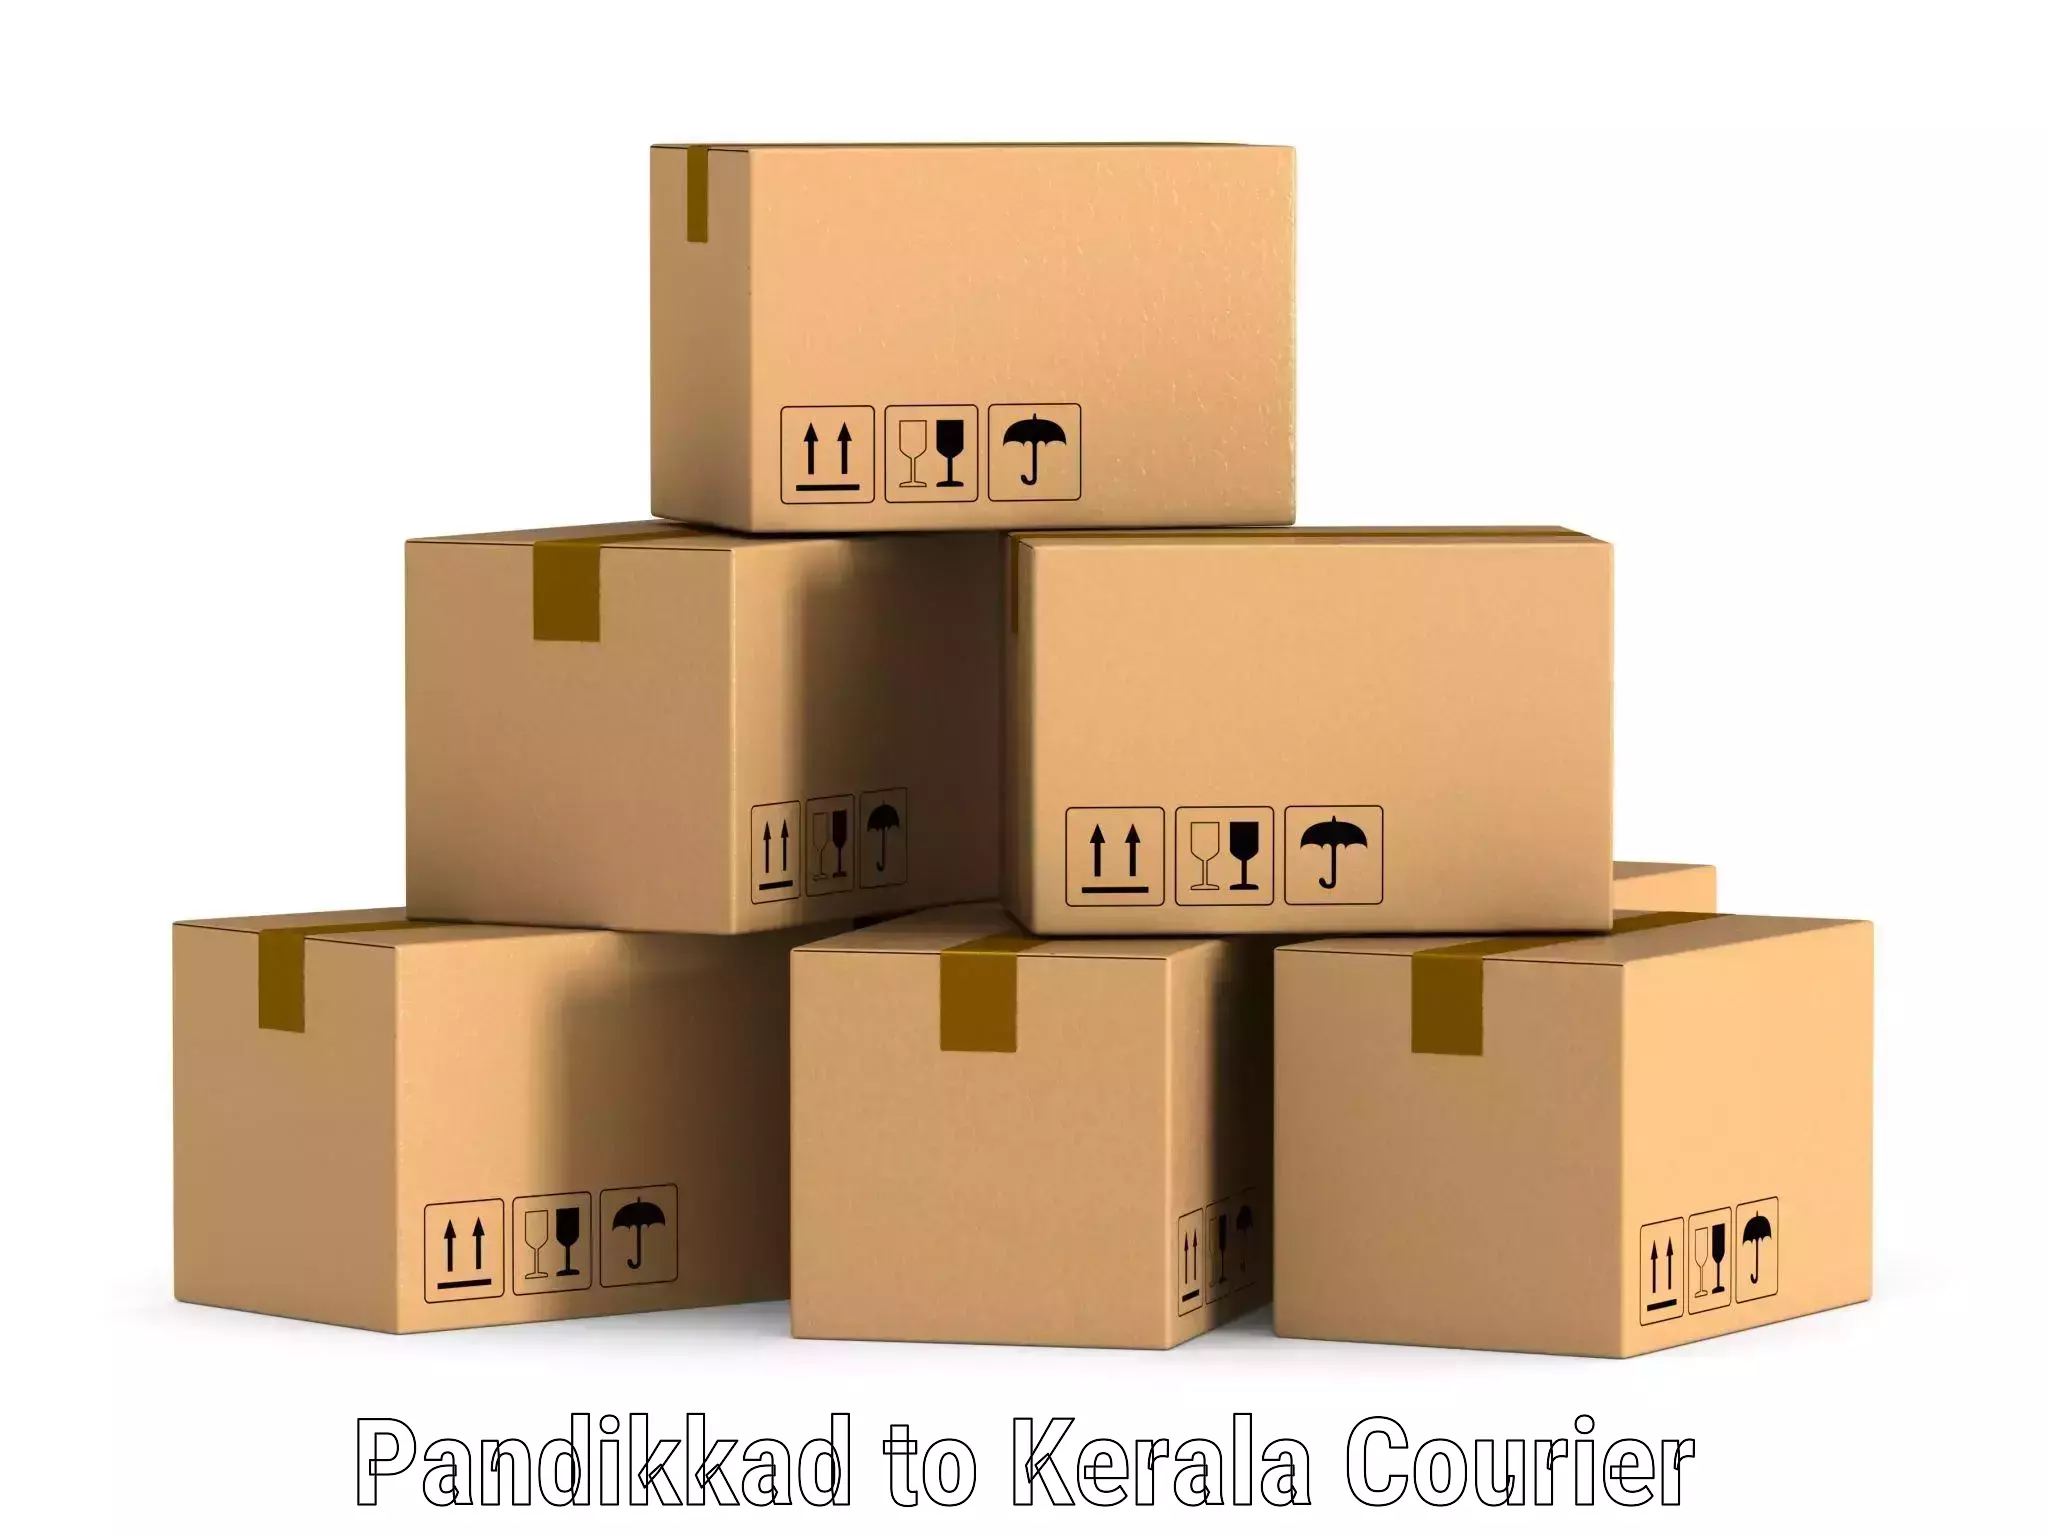 Overnight delivery services Pandikkad to Cochin Port Kochi